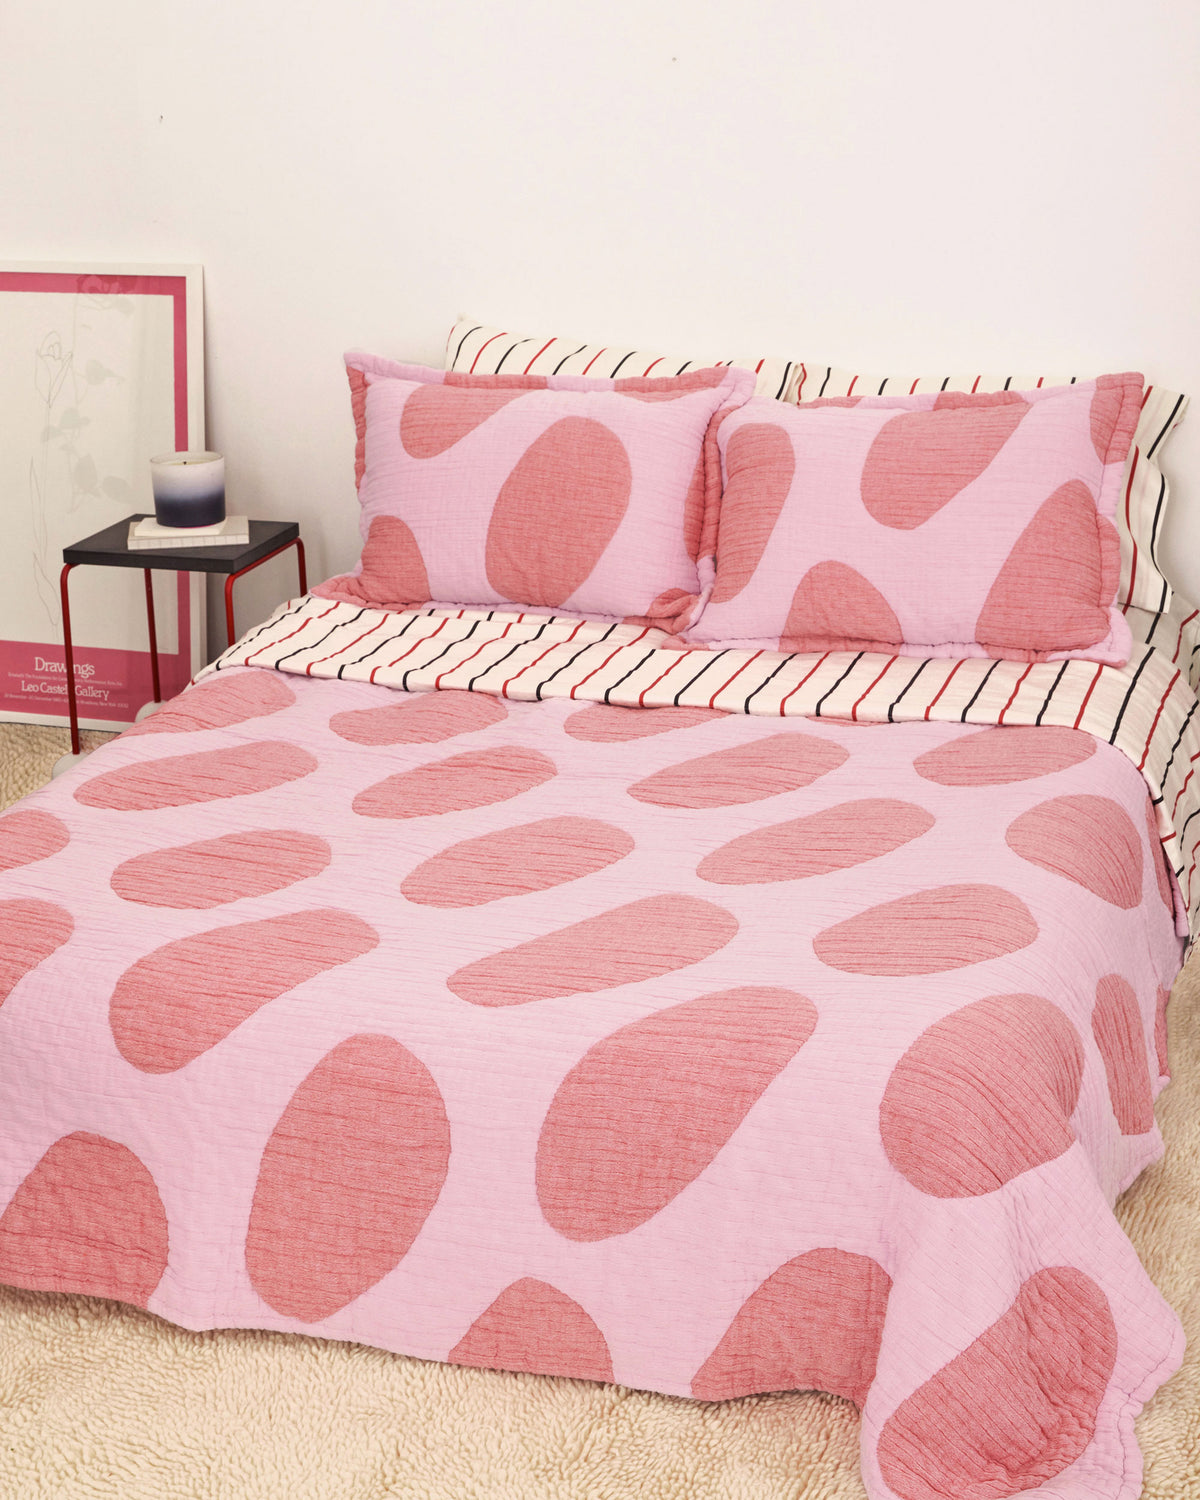 Dusen Dusen Egg Coverlet. Coverlet Set in dark and light pink Egg print. Woven matelassé coverlet with an inner layer of insulation for a quilted effect. Stone-washed, with an extra soft and gauzy hand feel.